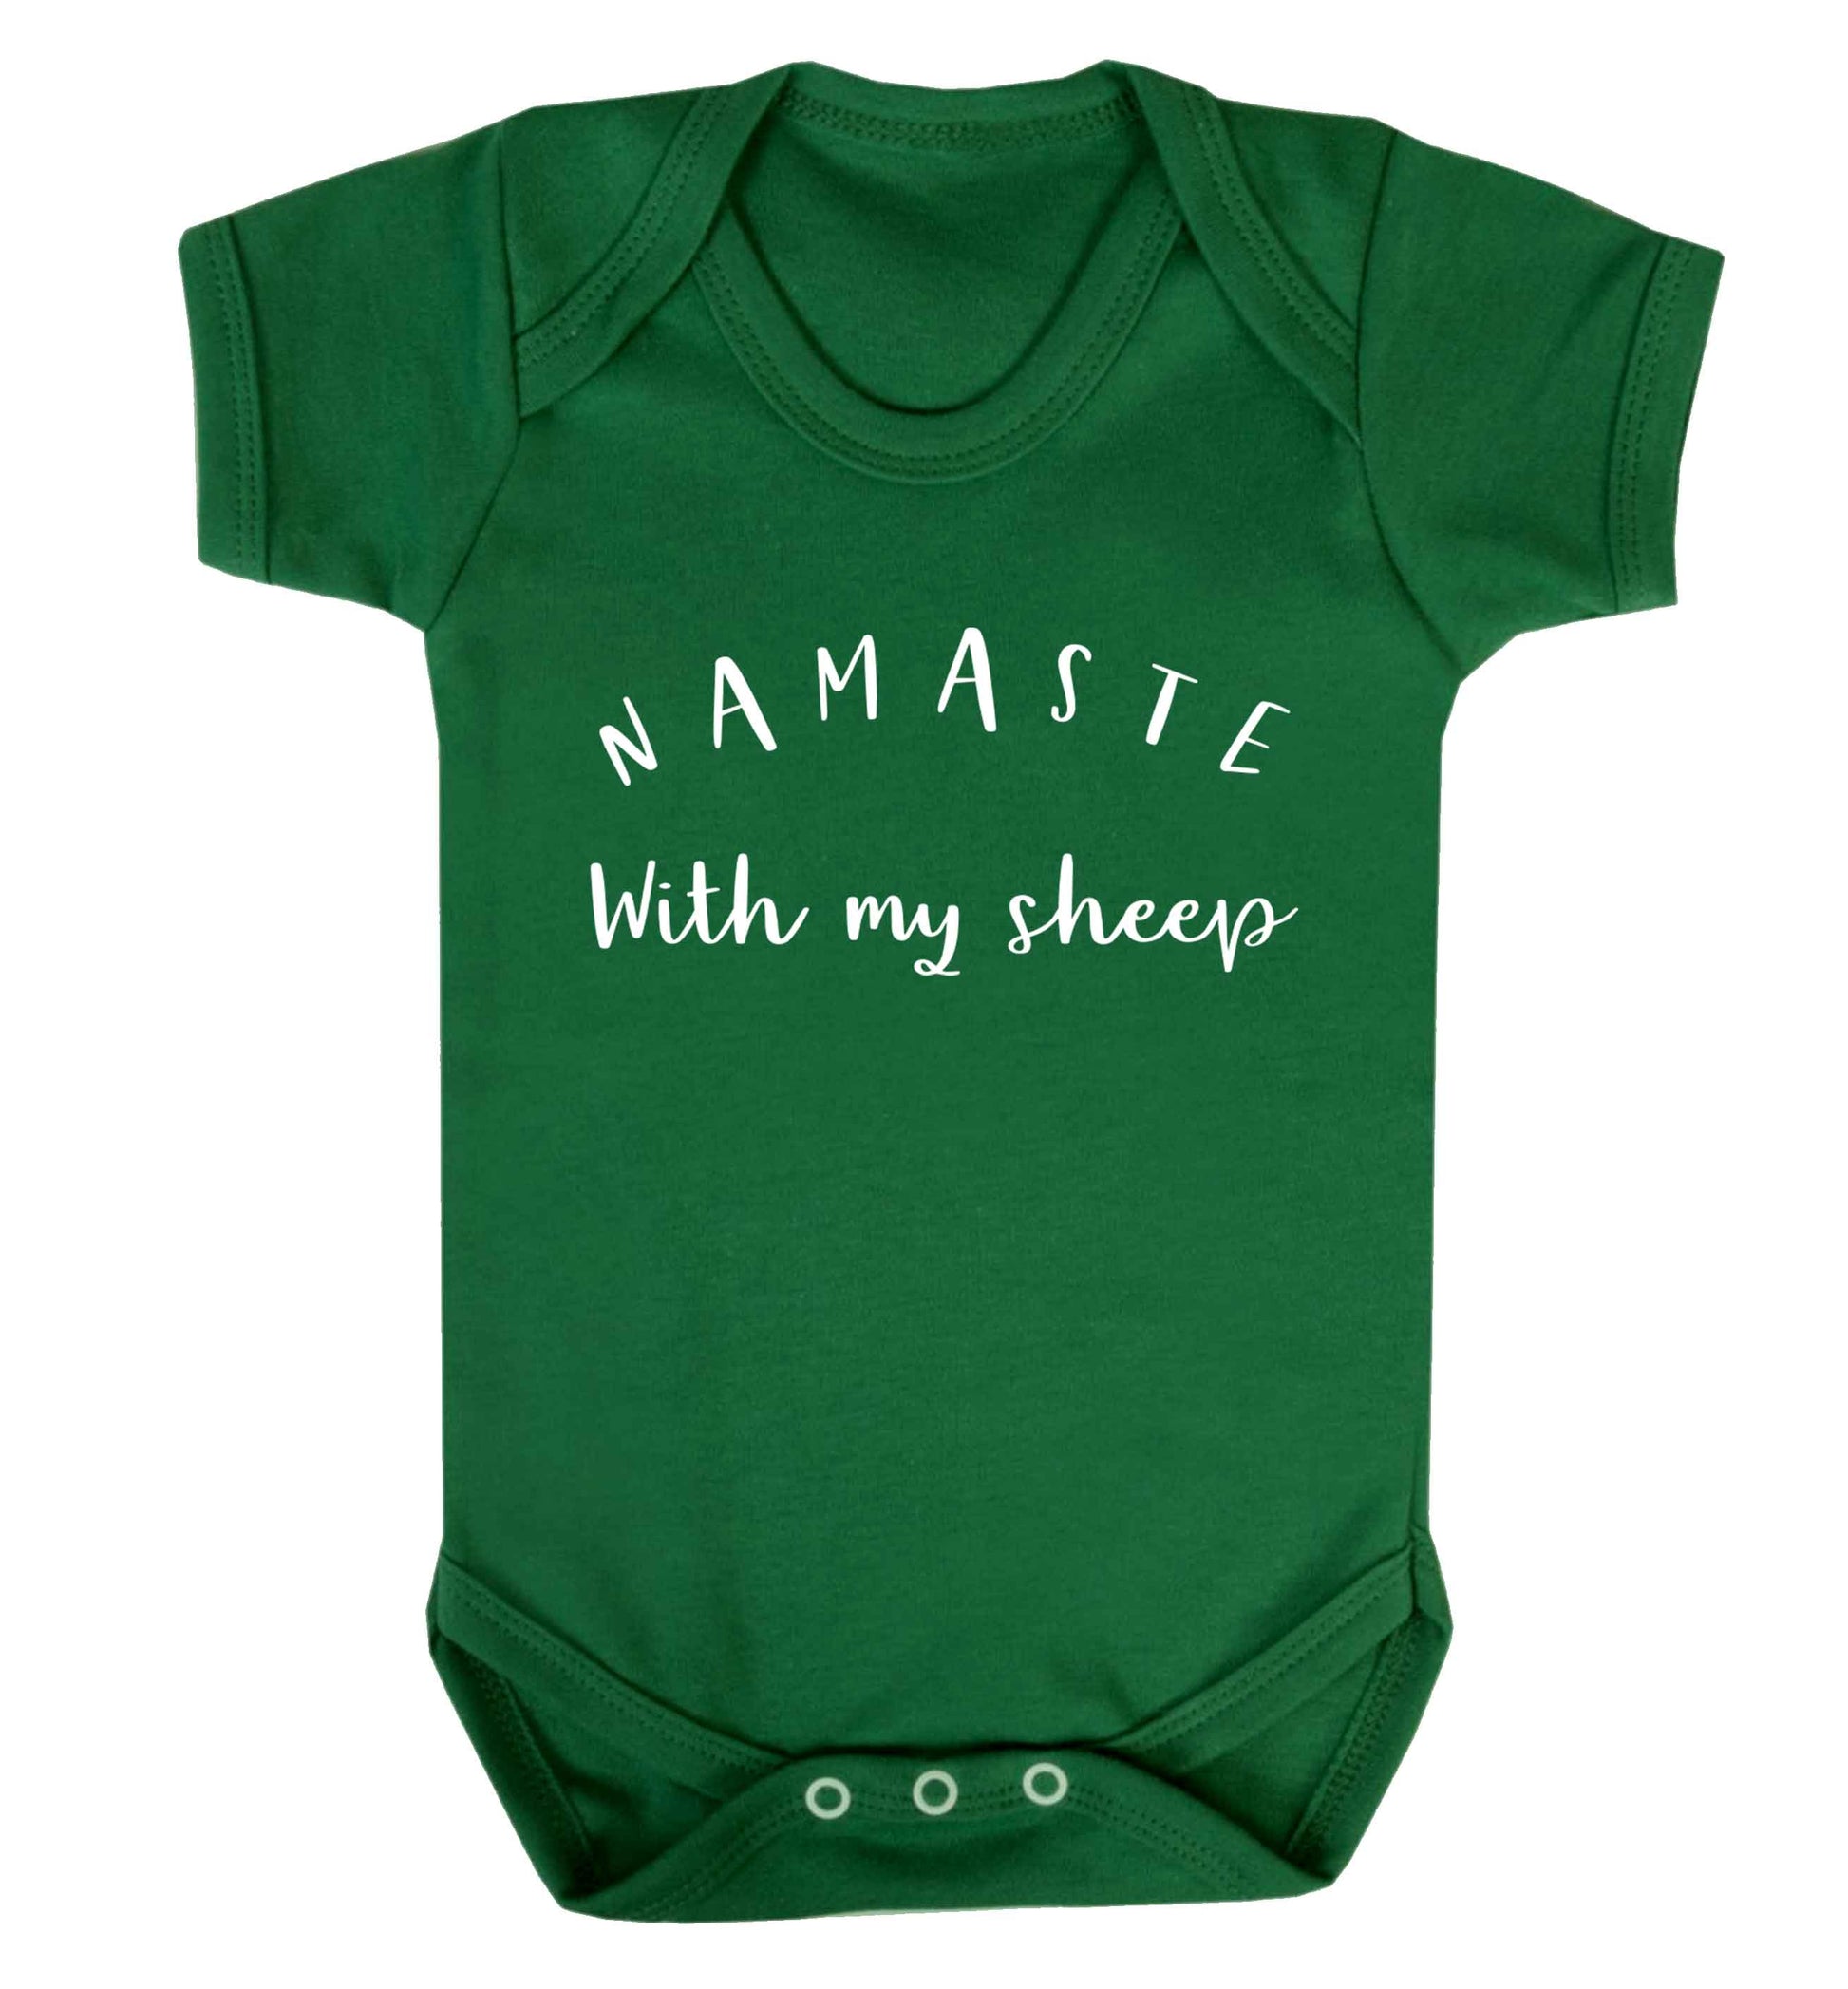 Namaste with my sheep Baby Vest green 18-24 months